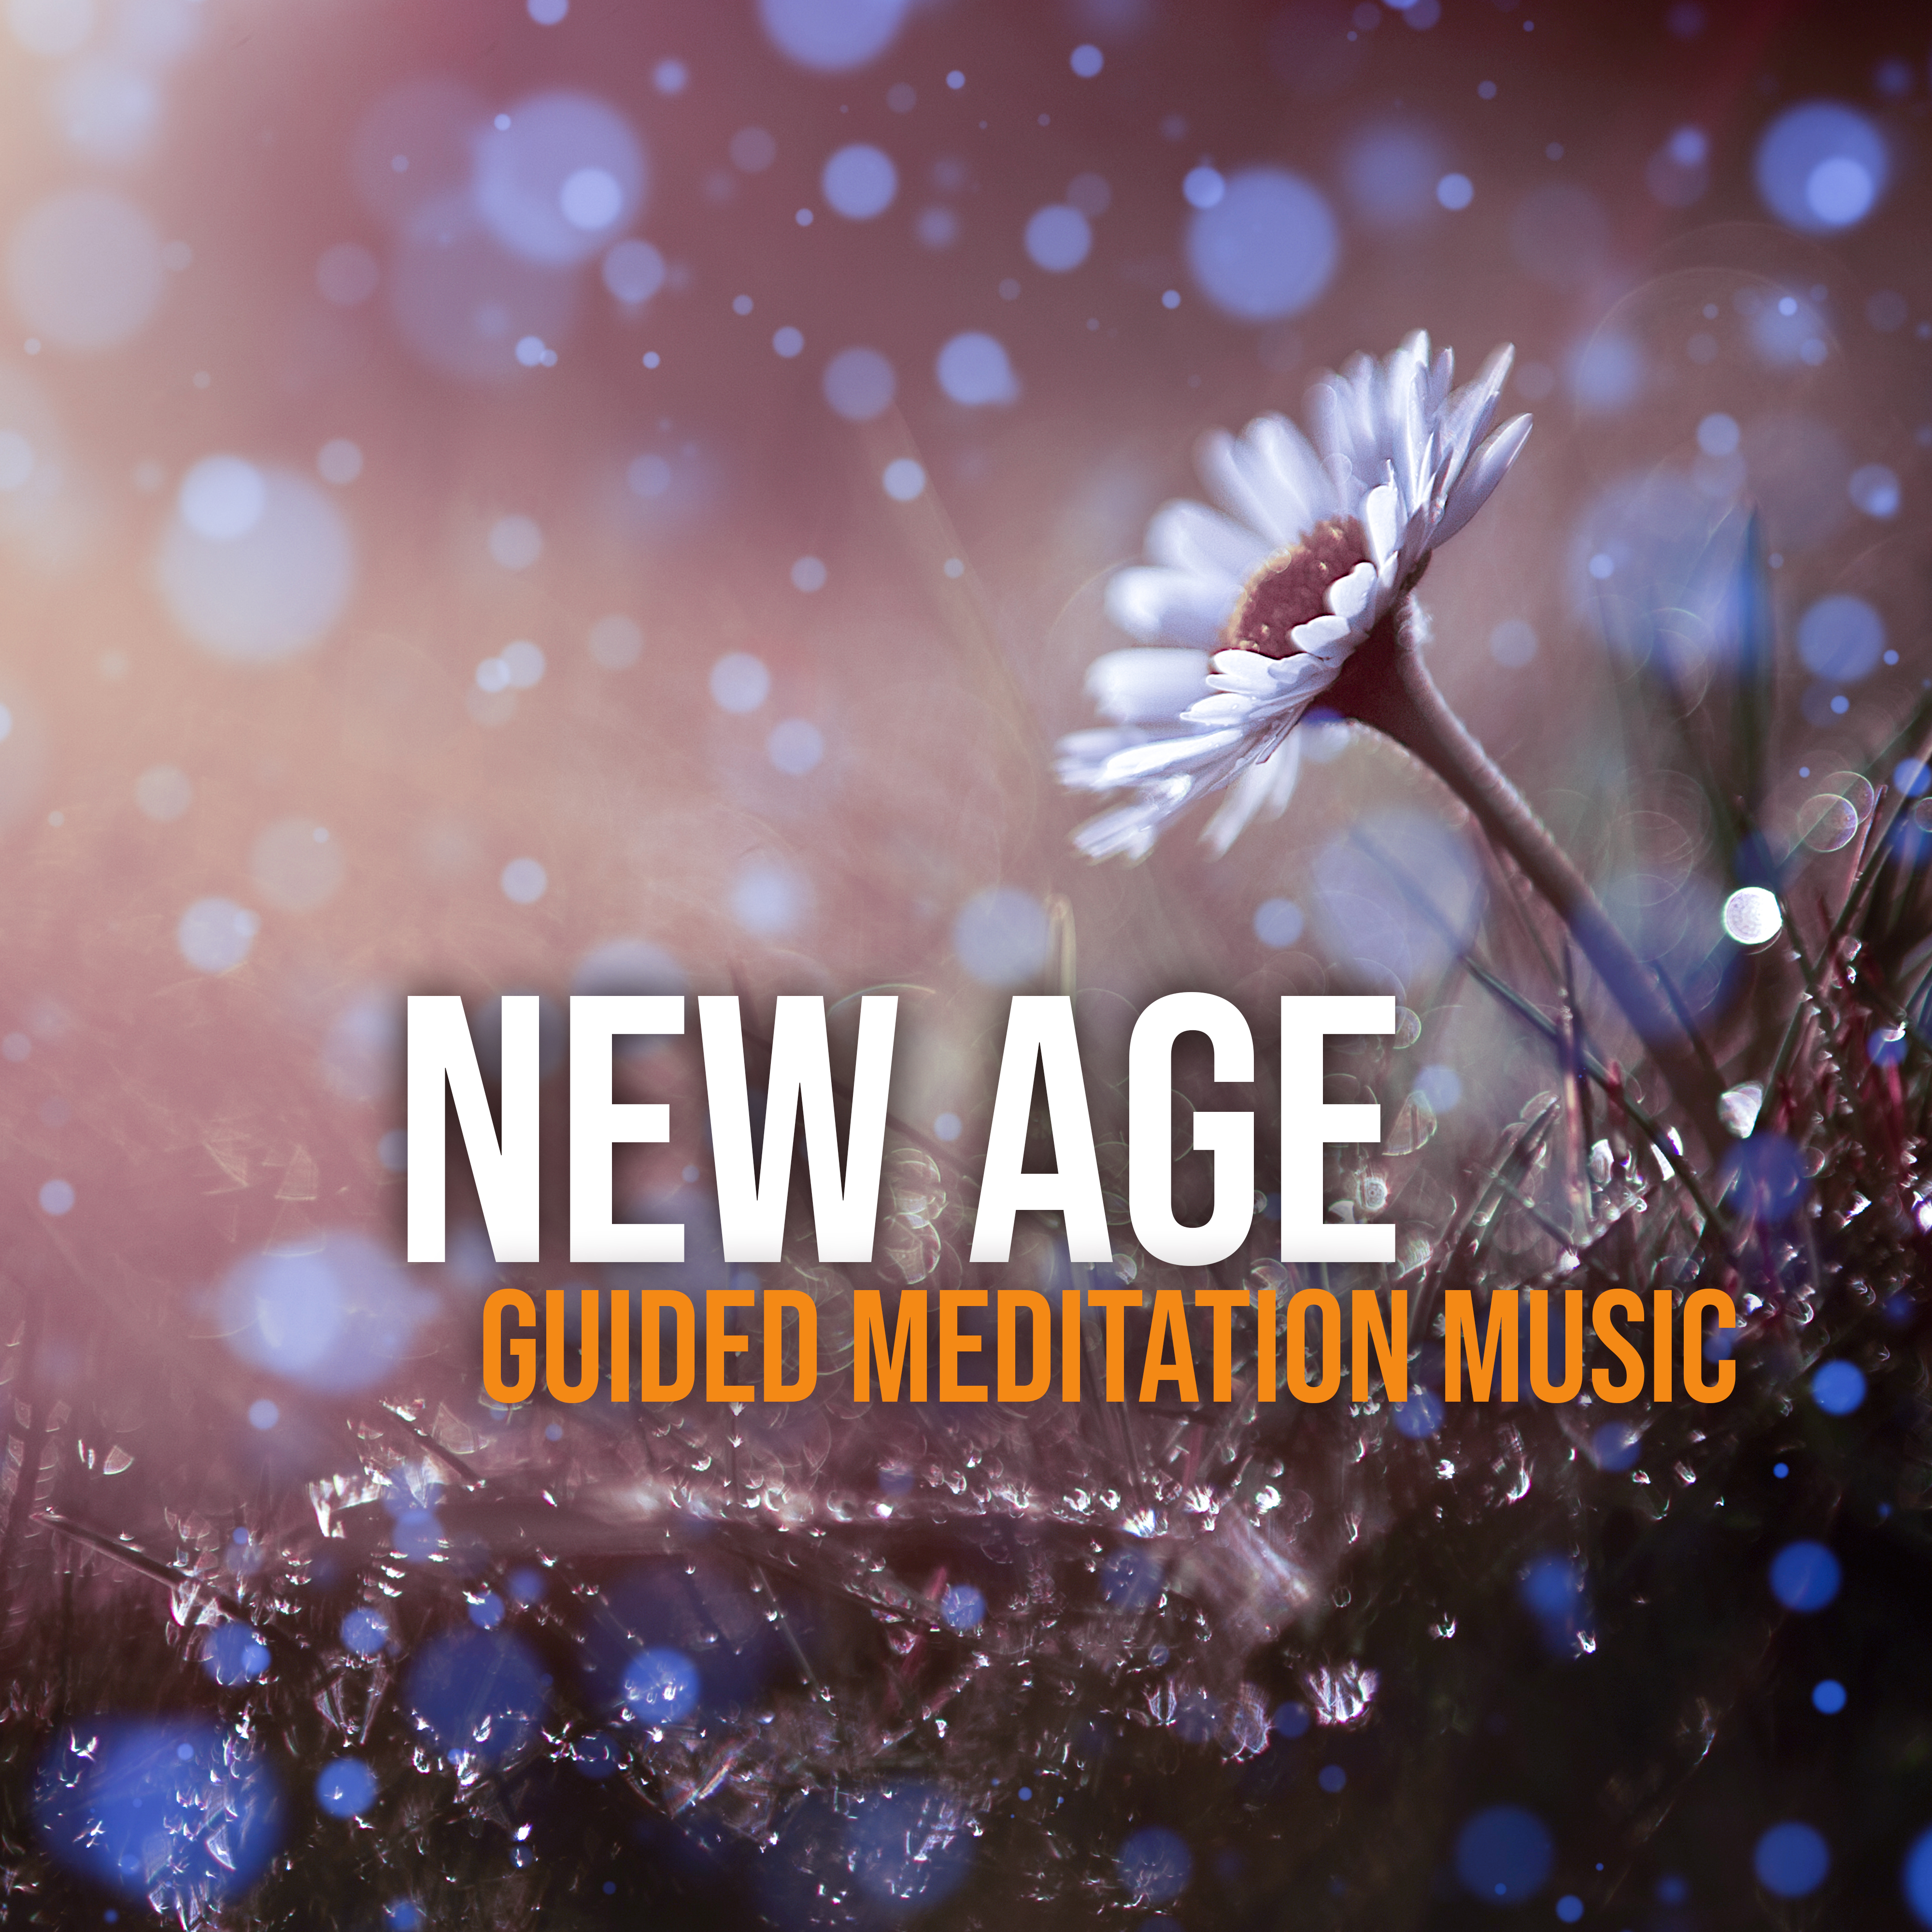 New Age Guided Meditation Music